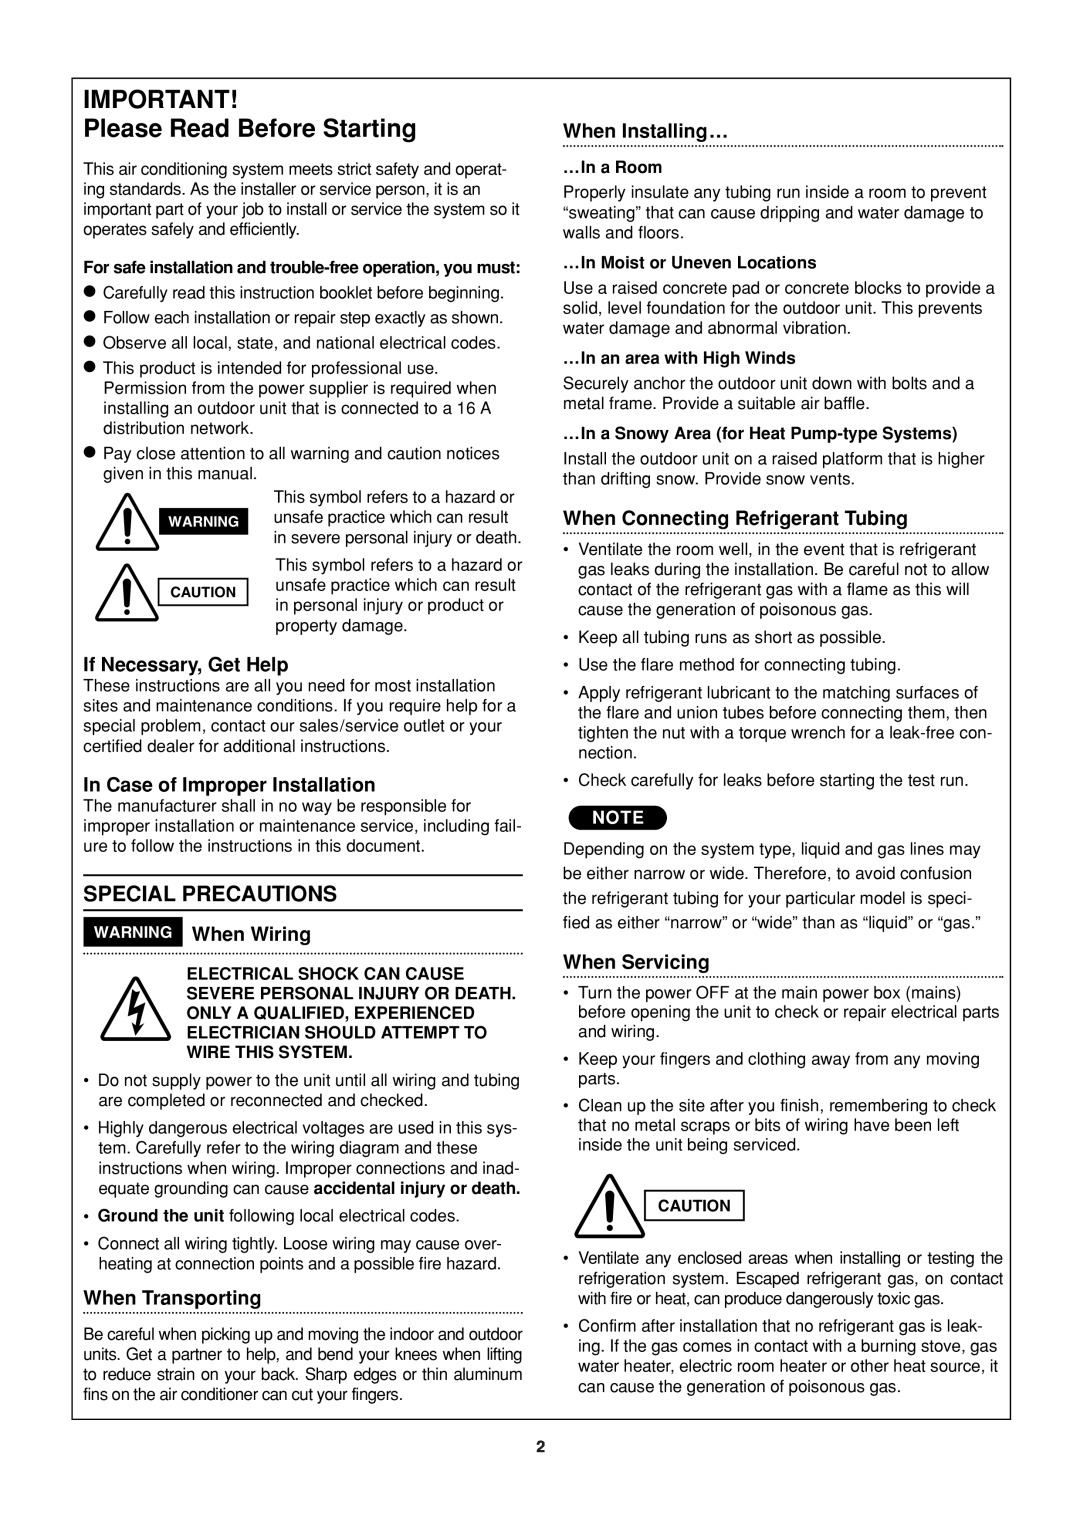 Sanyo SPW-FTR124EH56 Please Read Before Starting, Special Precautions, If Necessary, Get Help, WARNING When Wiring 